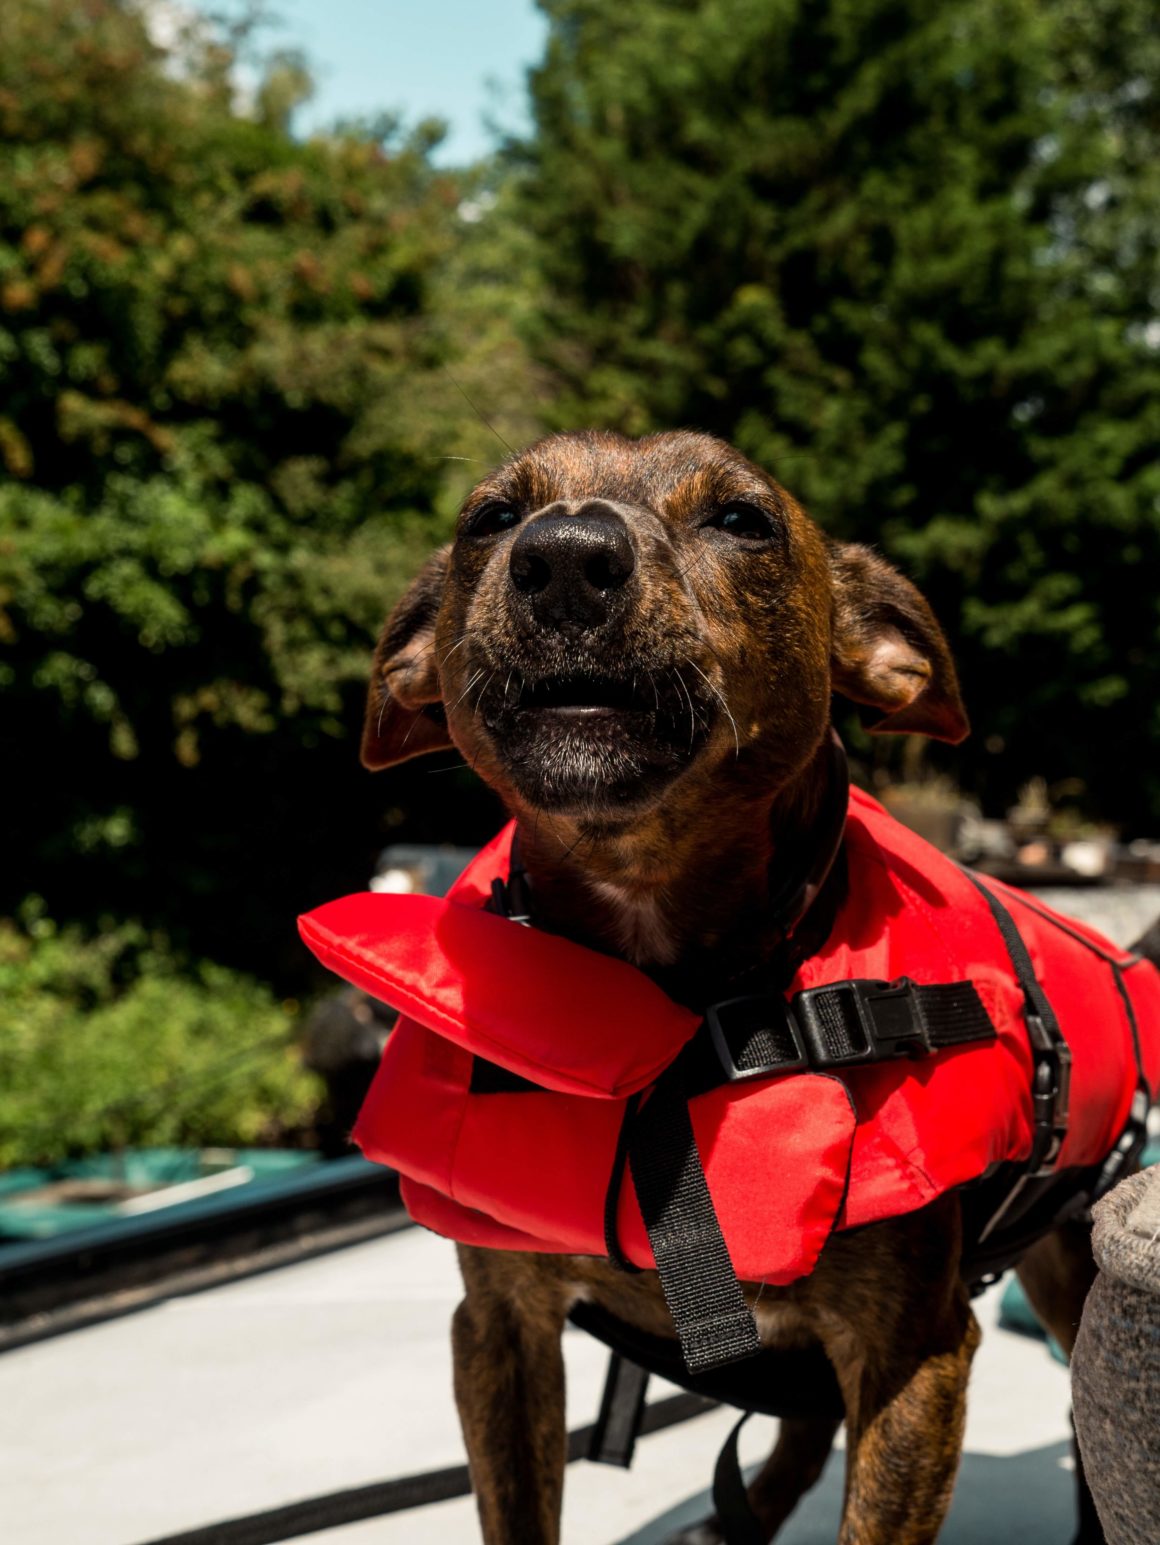 A dog barking on a boat while wearing a safety life jacket